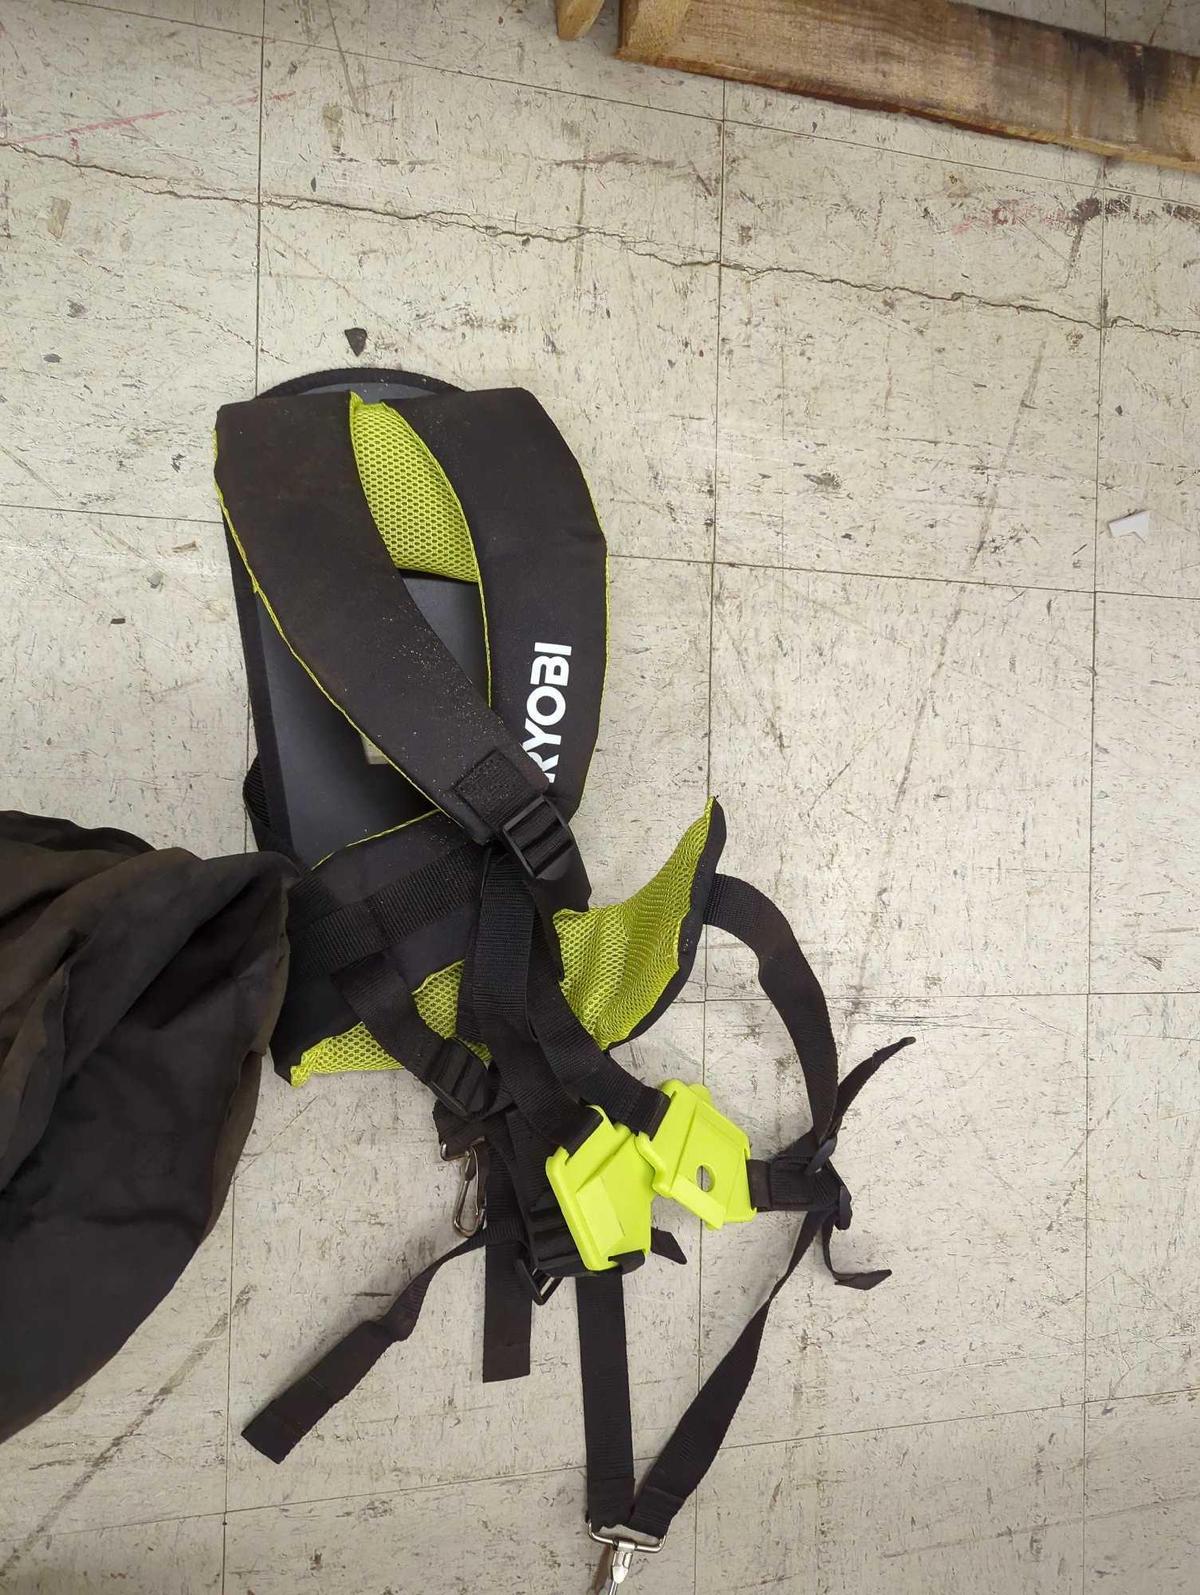 Lot of Items to Include, A Ryobi Backpack Leaf Blower Strap, and Ryobi Leaf bag / maulcher with two